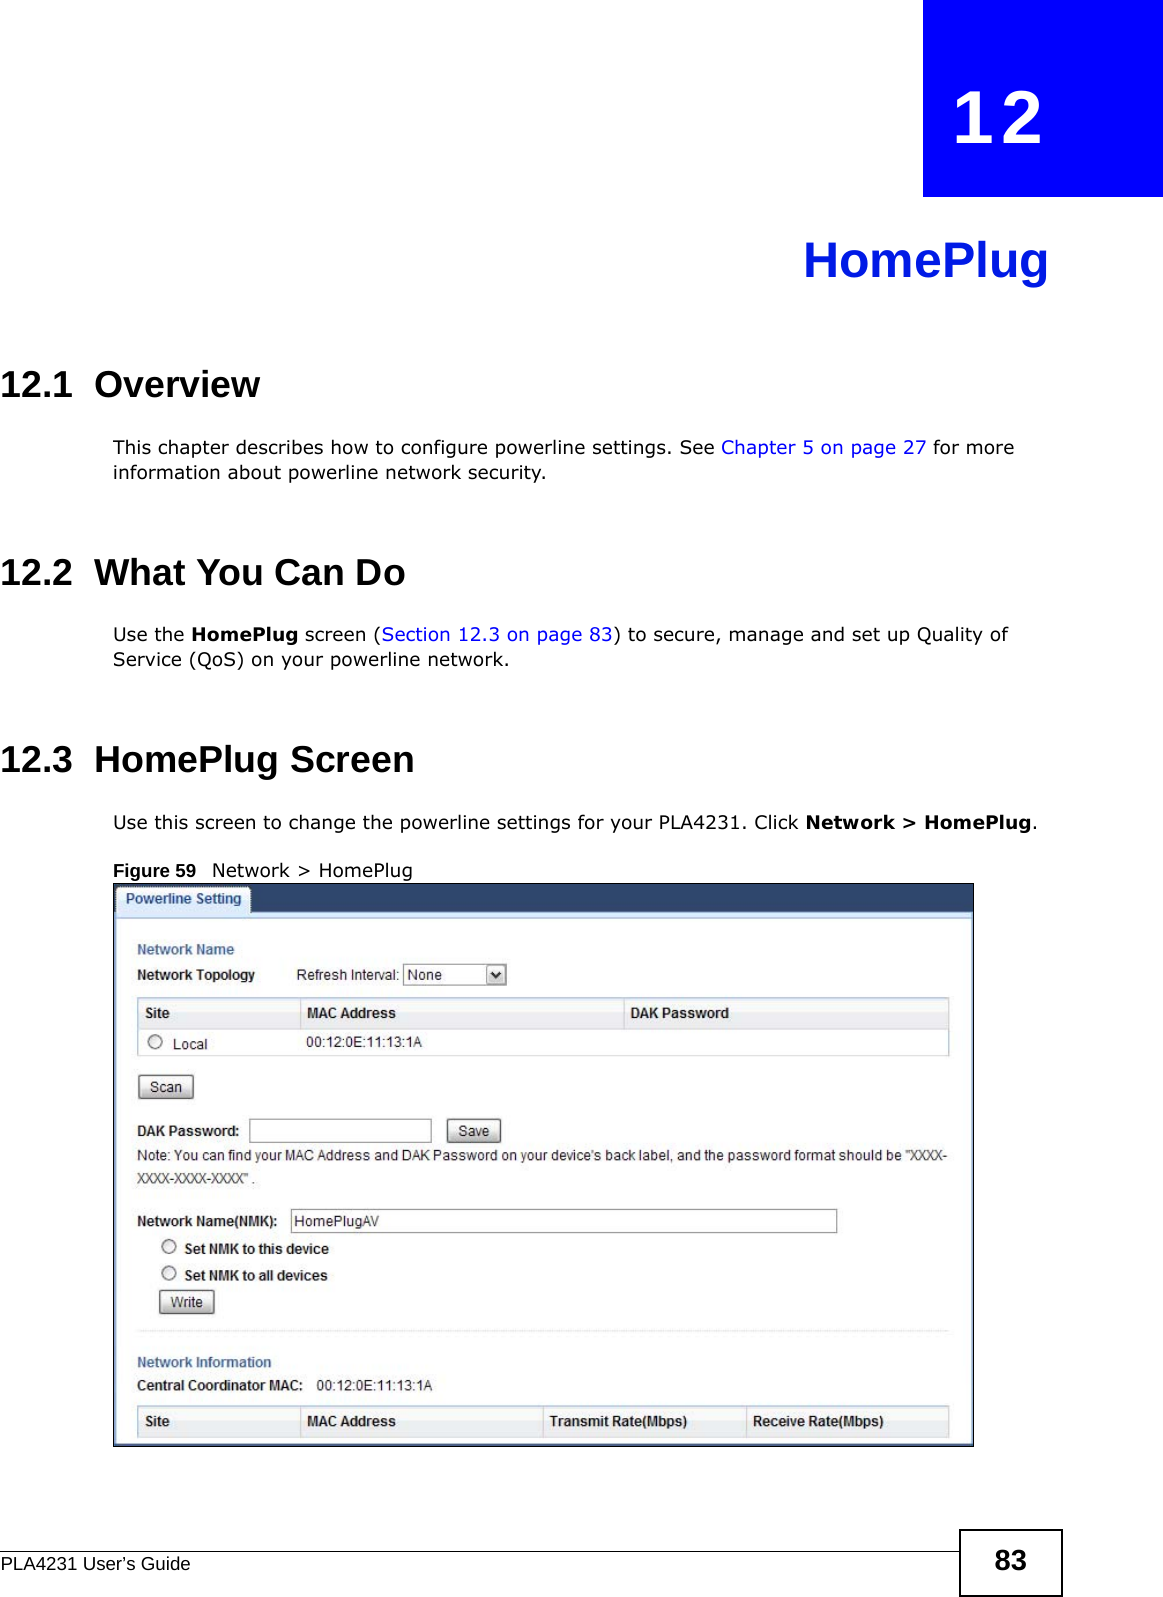 PLA4231 User’s Guide 83CHAPTER   12HomePlug12.1  OverviewThis chapter describes how to configure powerline settings. See Chapter 5 on page 27 for more information about powerline network security.12.2  What You Can DoUse the HomePlug screen (Section 12.3 on page 83) to secure, manage and set up Quality of Service (QoS) on your powerline network.12.3  HomePlug ScreenUse this screen to change the powerline settings for your PLA4231. Click Network &gt; HomePlug.Figure 59   Network &gt; HomePlug 